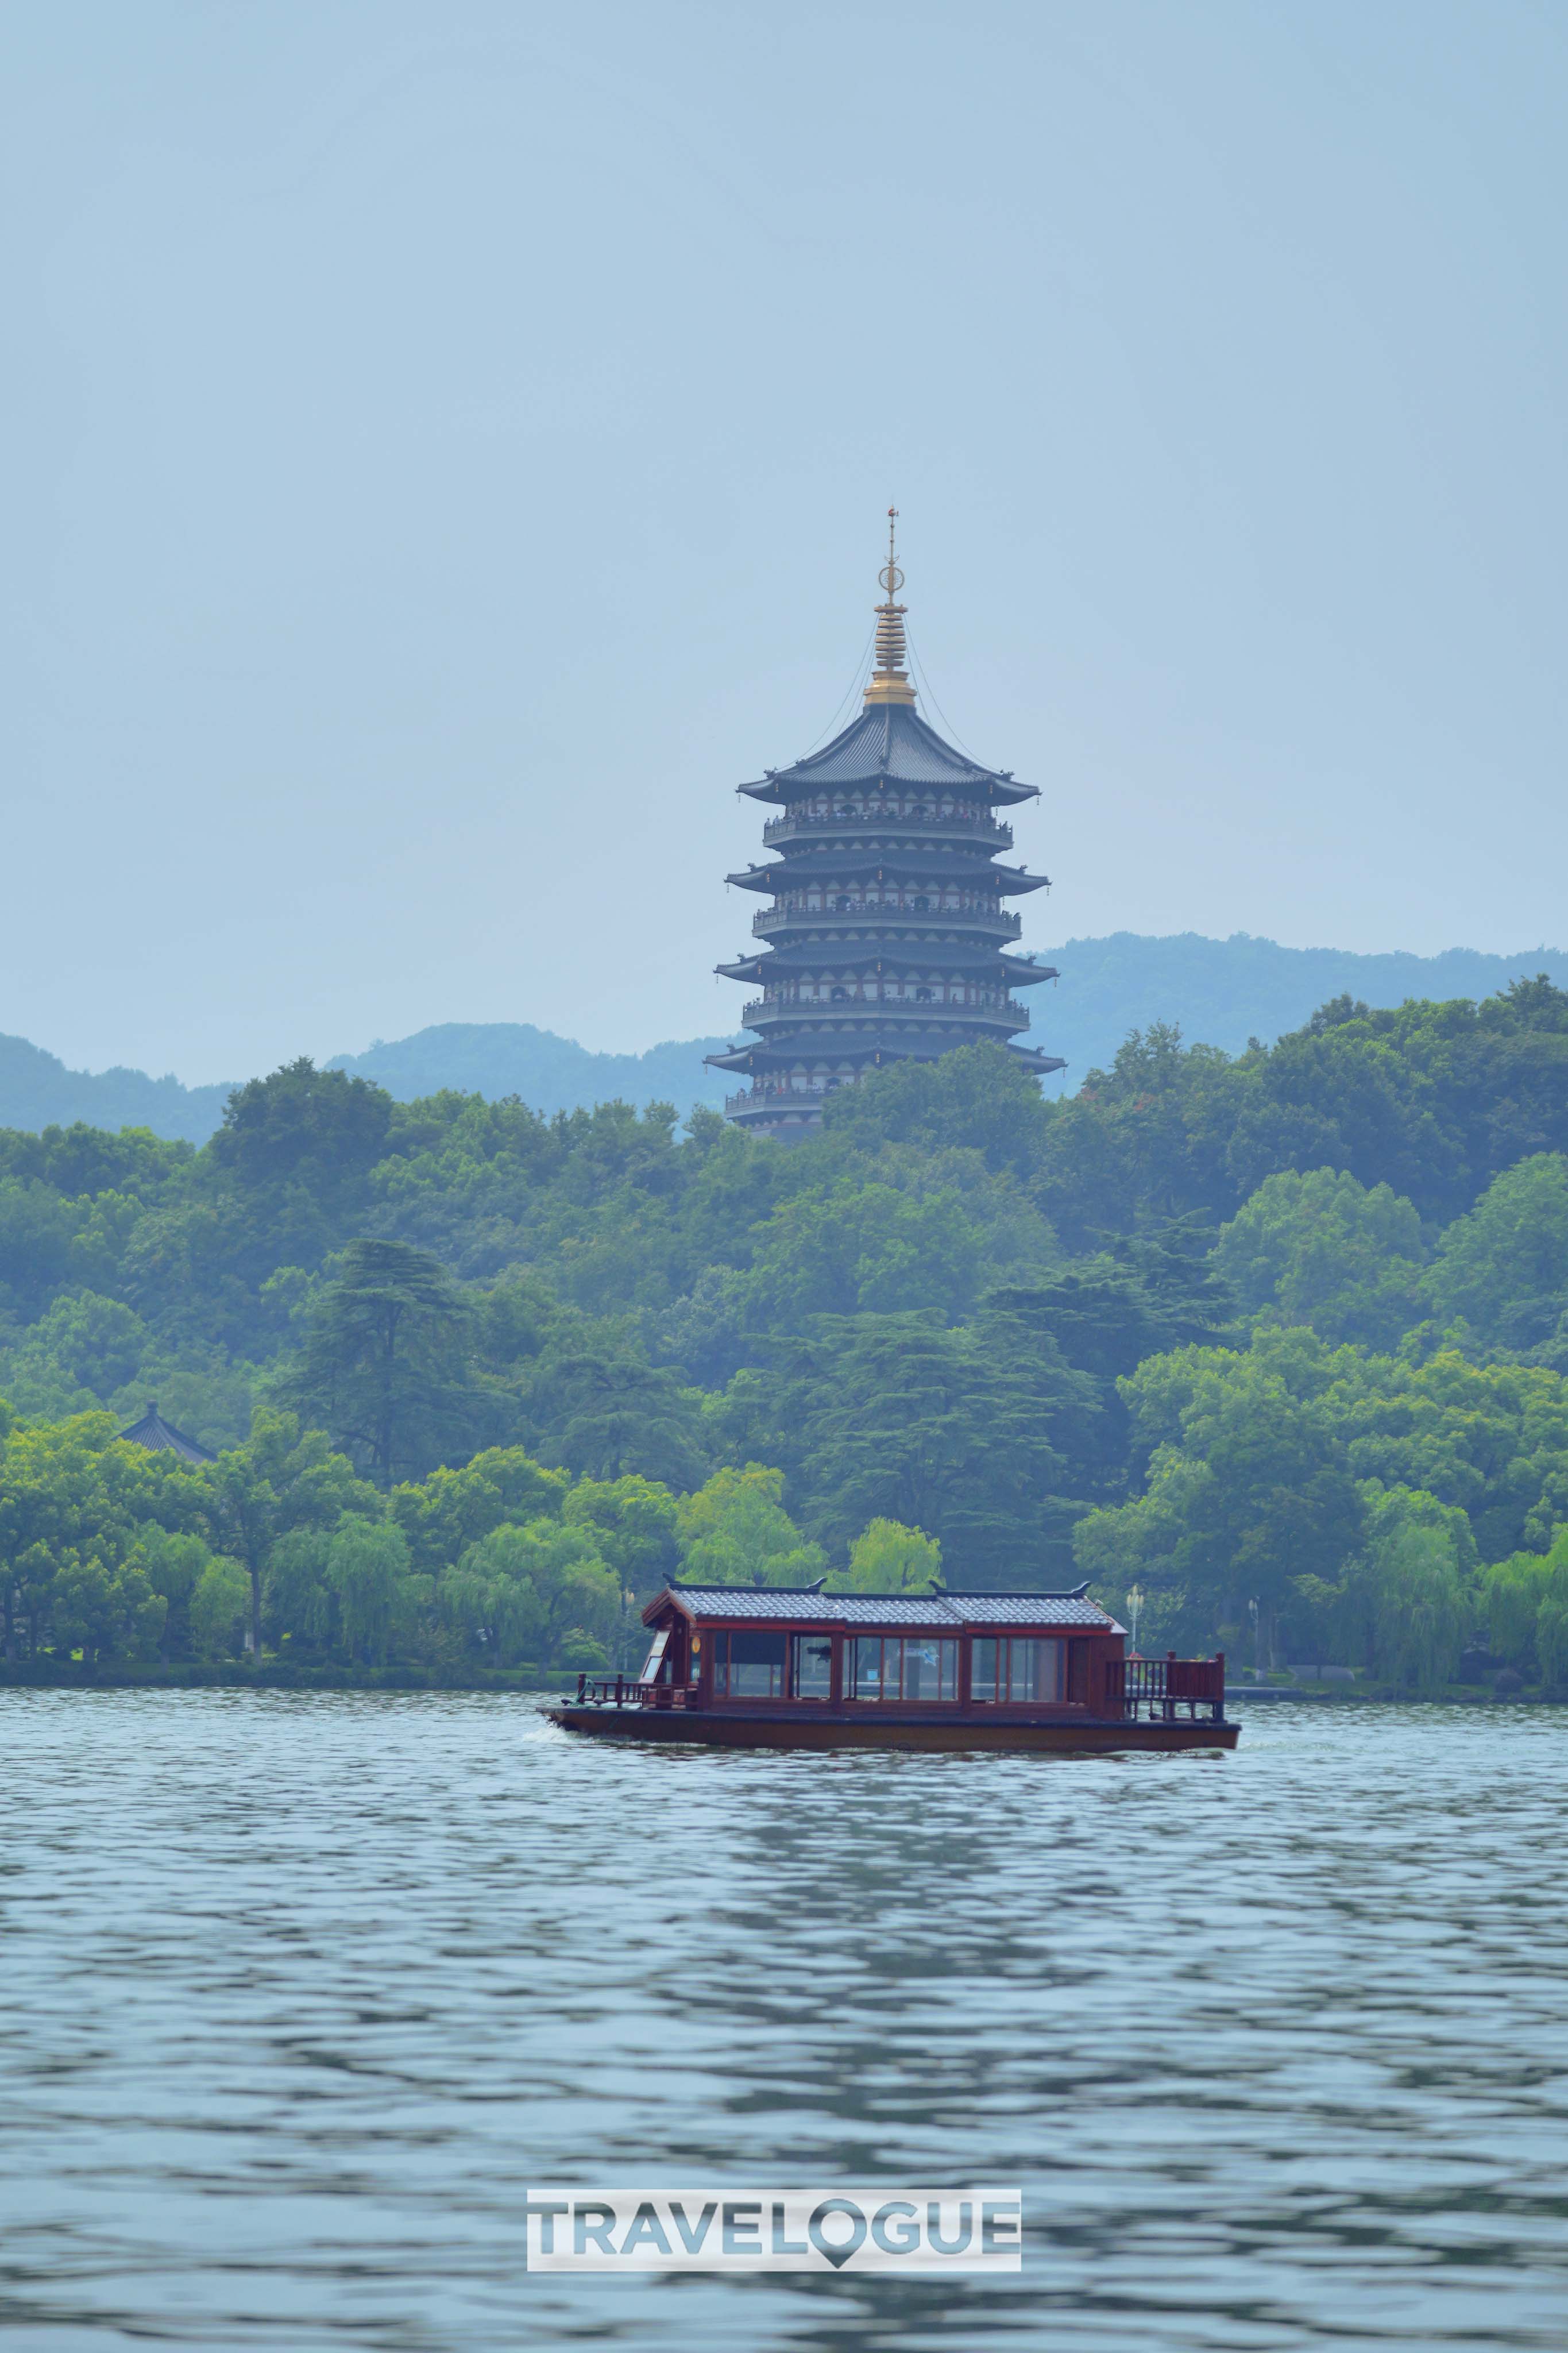 The West Lake in Hangzhou, Zhejiang Province attracts many tourists every year. /CGTN